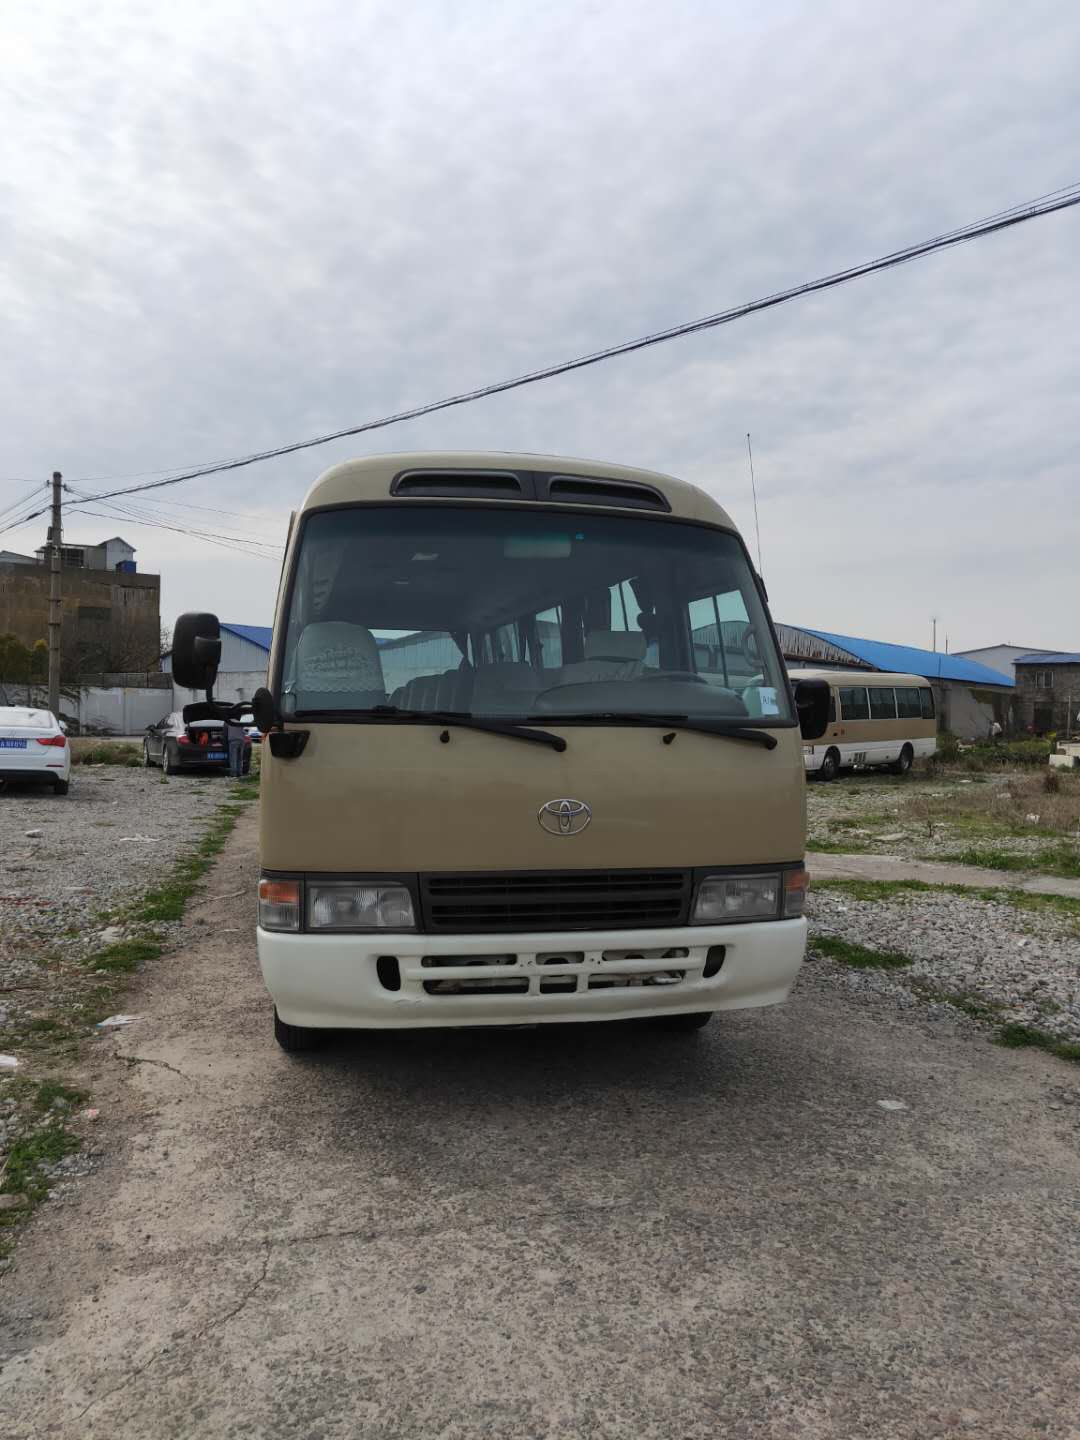 Quality LHD 2016 second hand /used toyota coaster mini coach for sale with 30 seats for sale